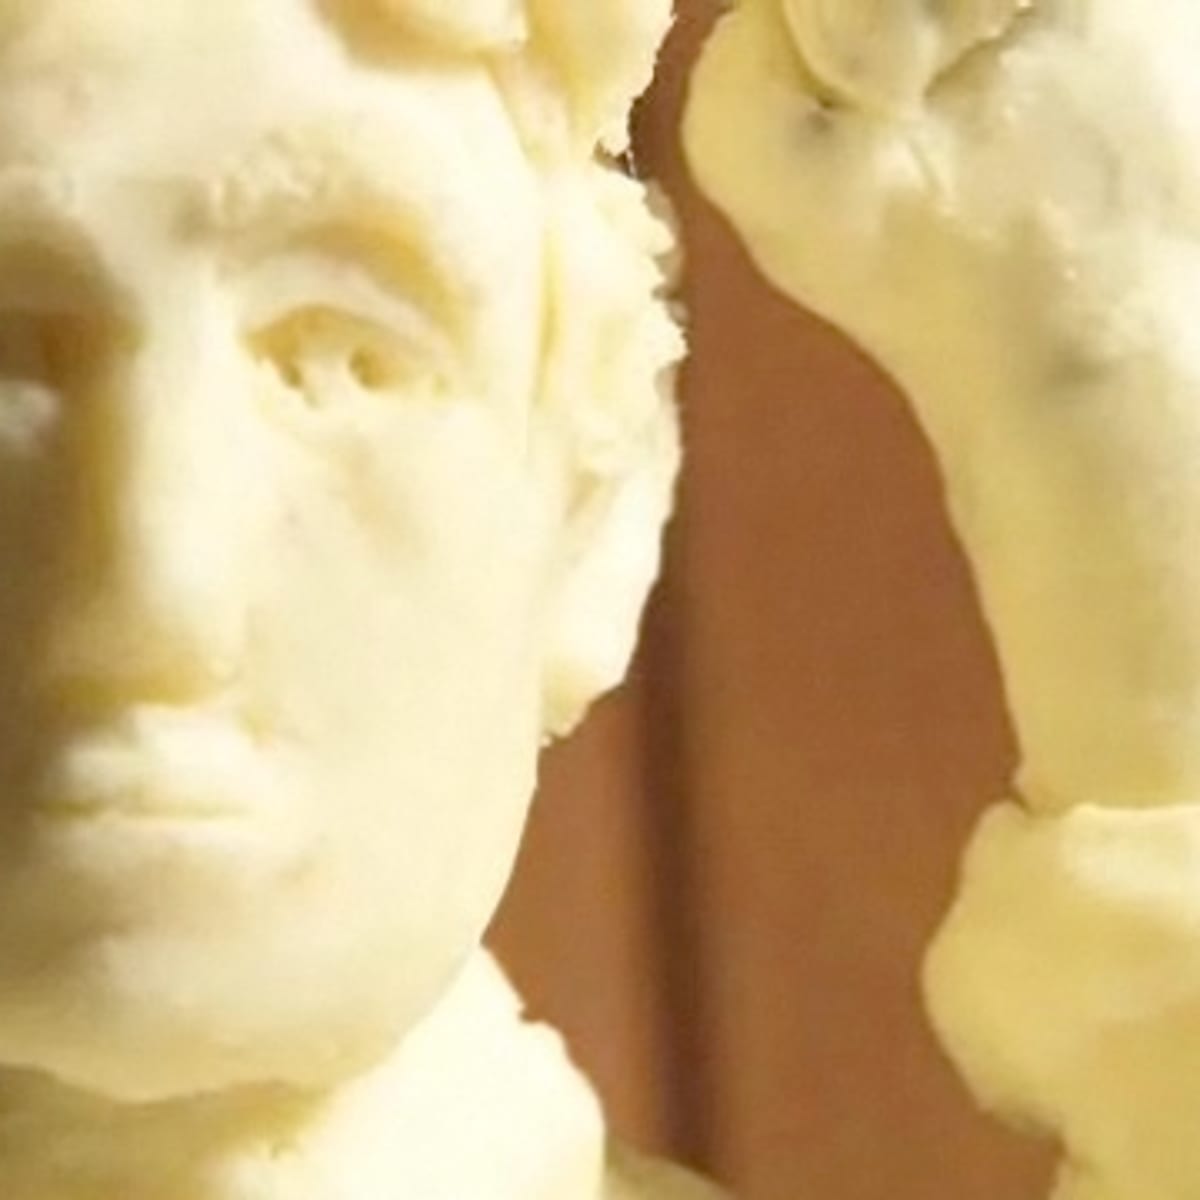 How to Make a Butter Sculpture - Howcast